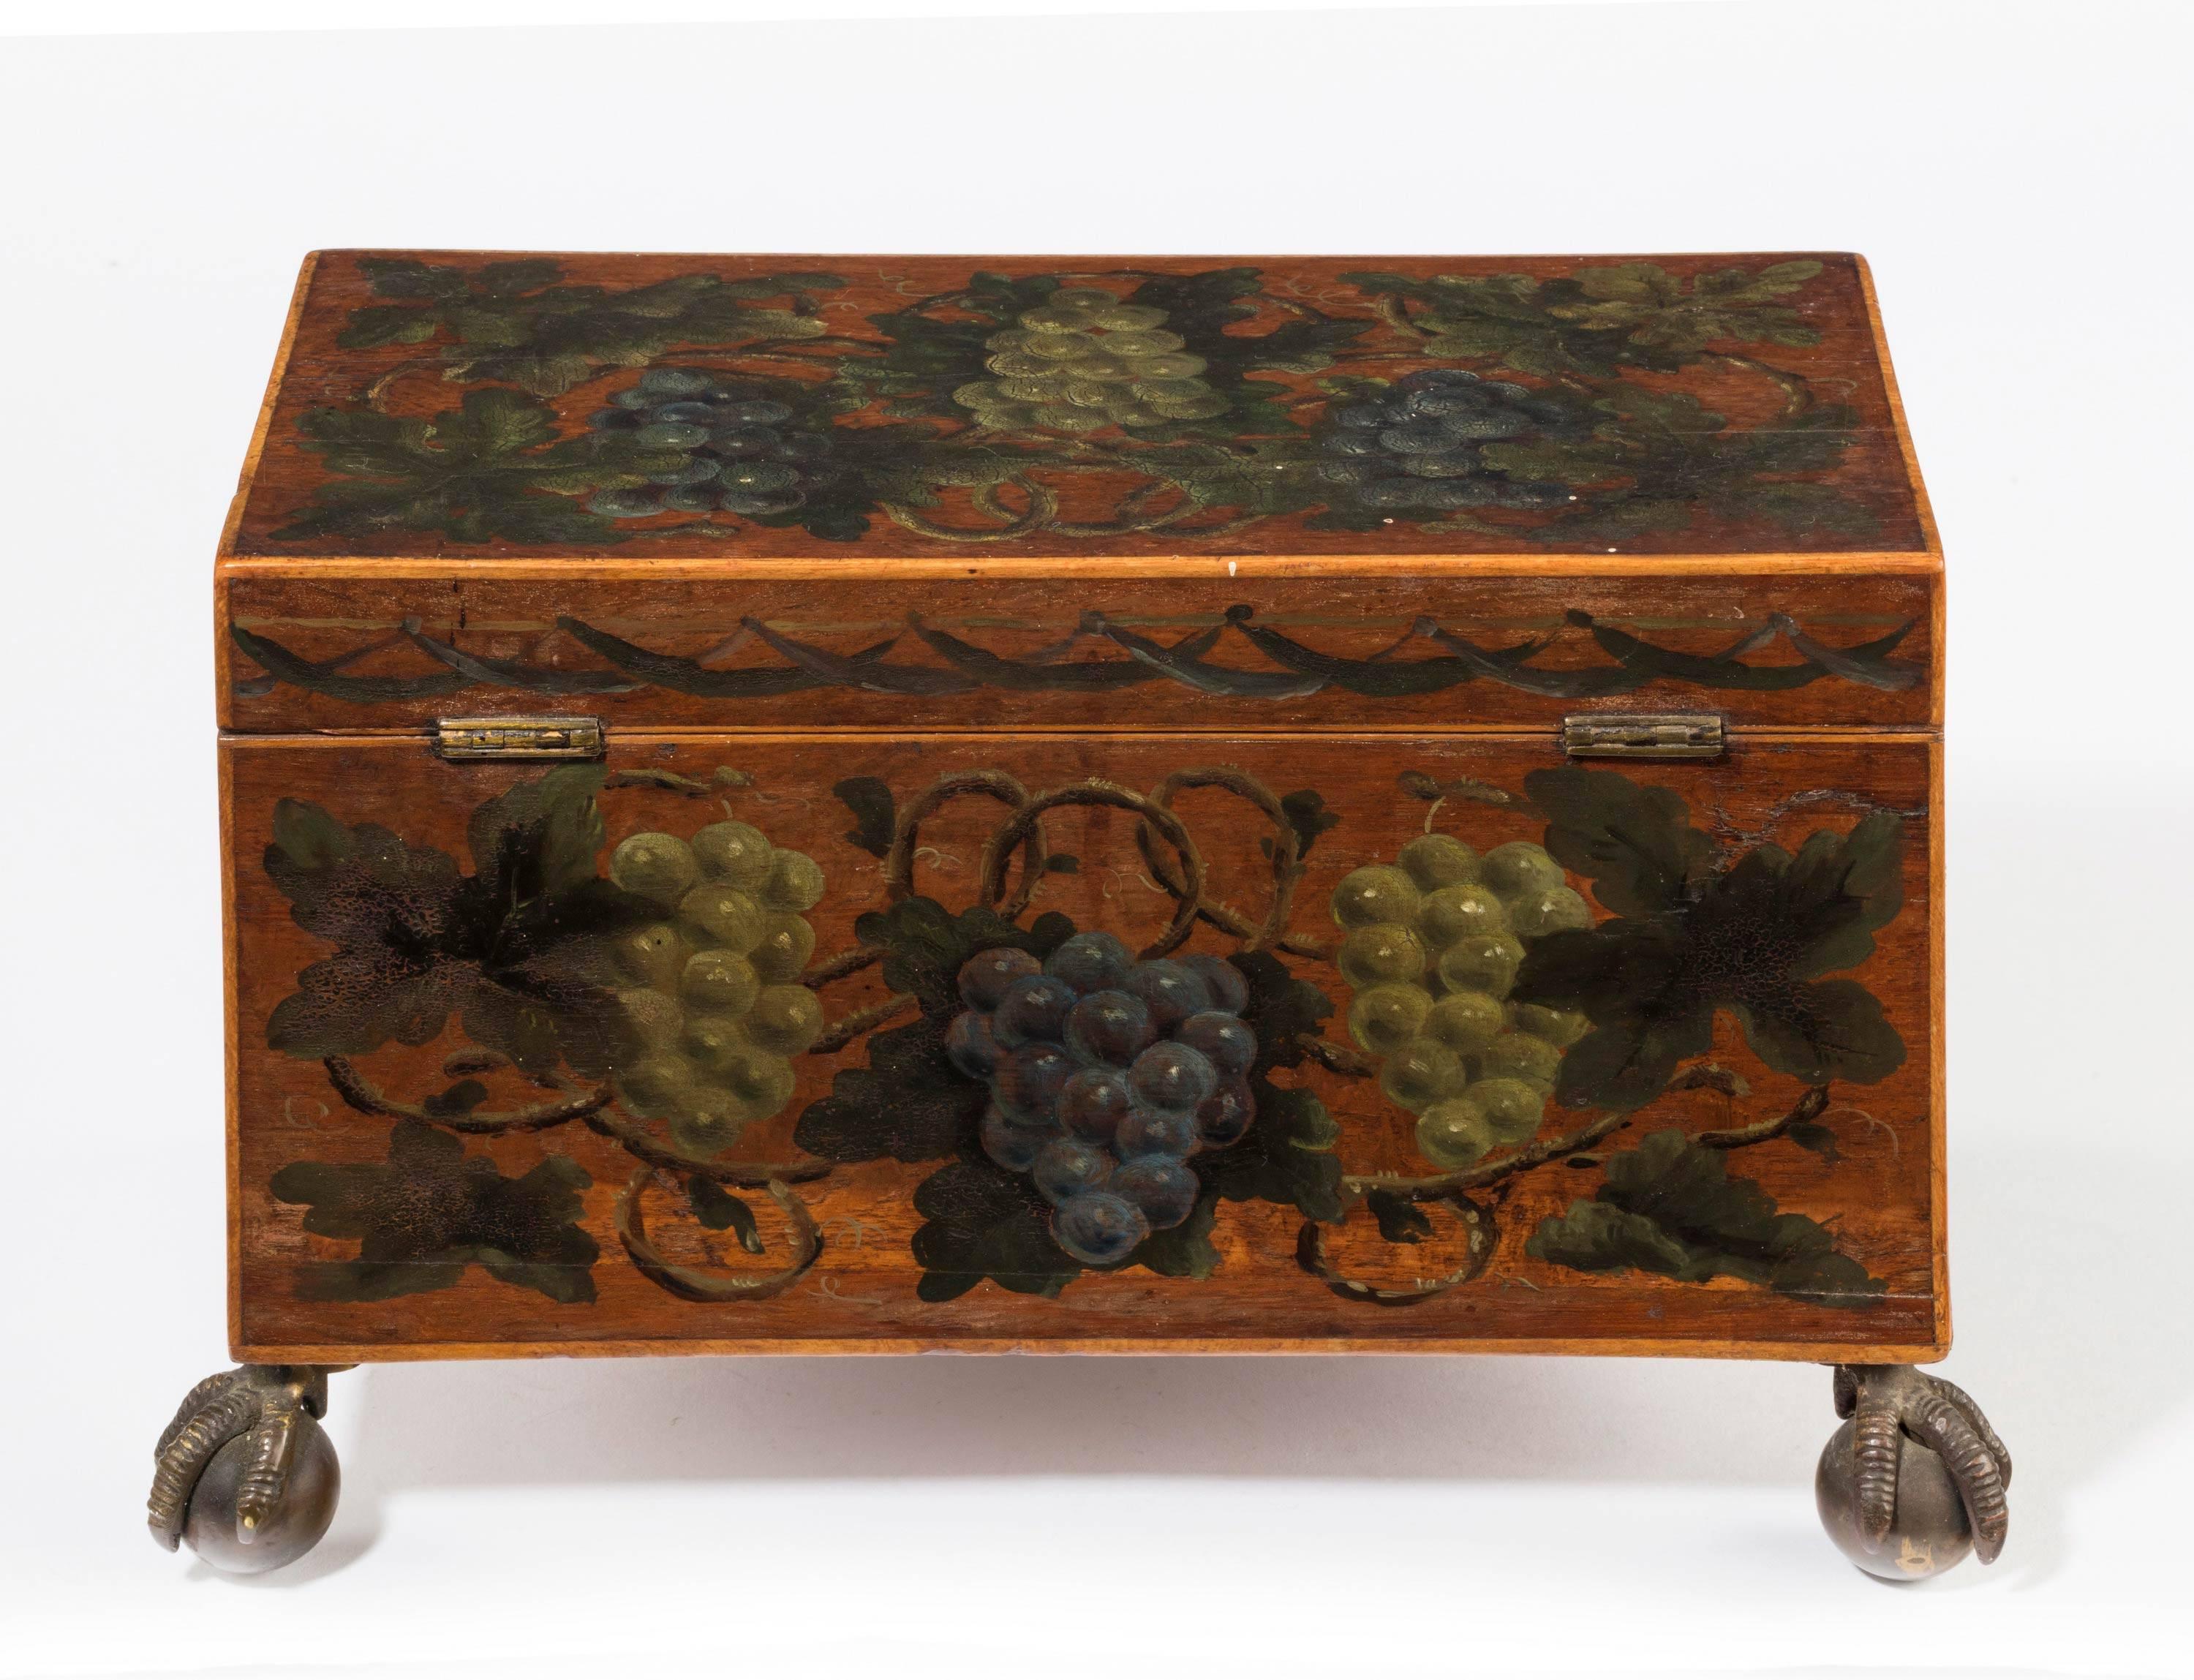 George III period mahogany box on original cast claw and ball bronze feet. All sides beautifully painted with grapes and foliage. Quite amazing original condition.